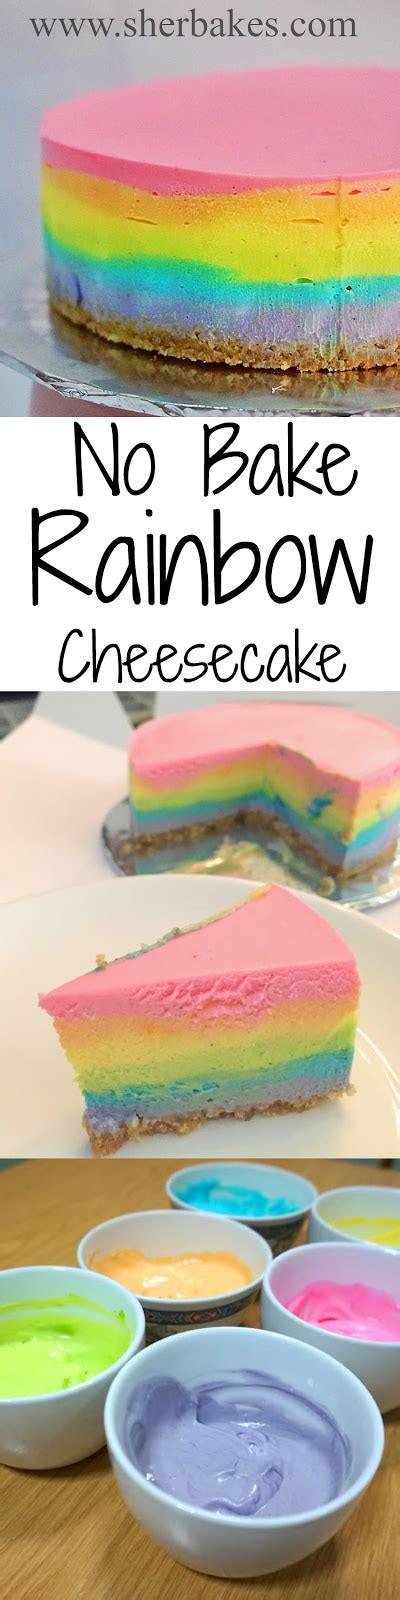 No Bake Rainbow Cheesecake By Sherbakes And Other Great No Bake